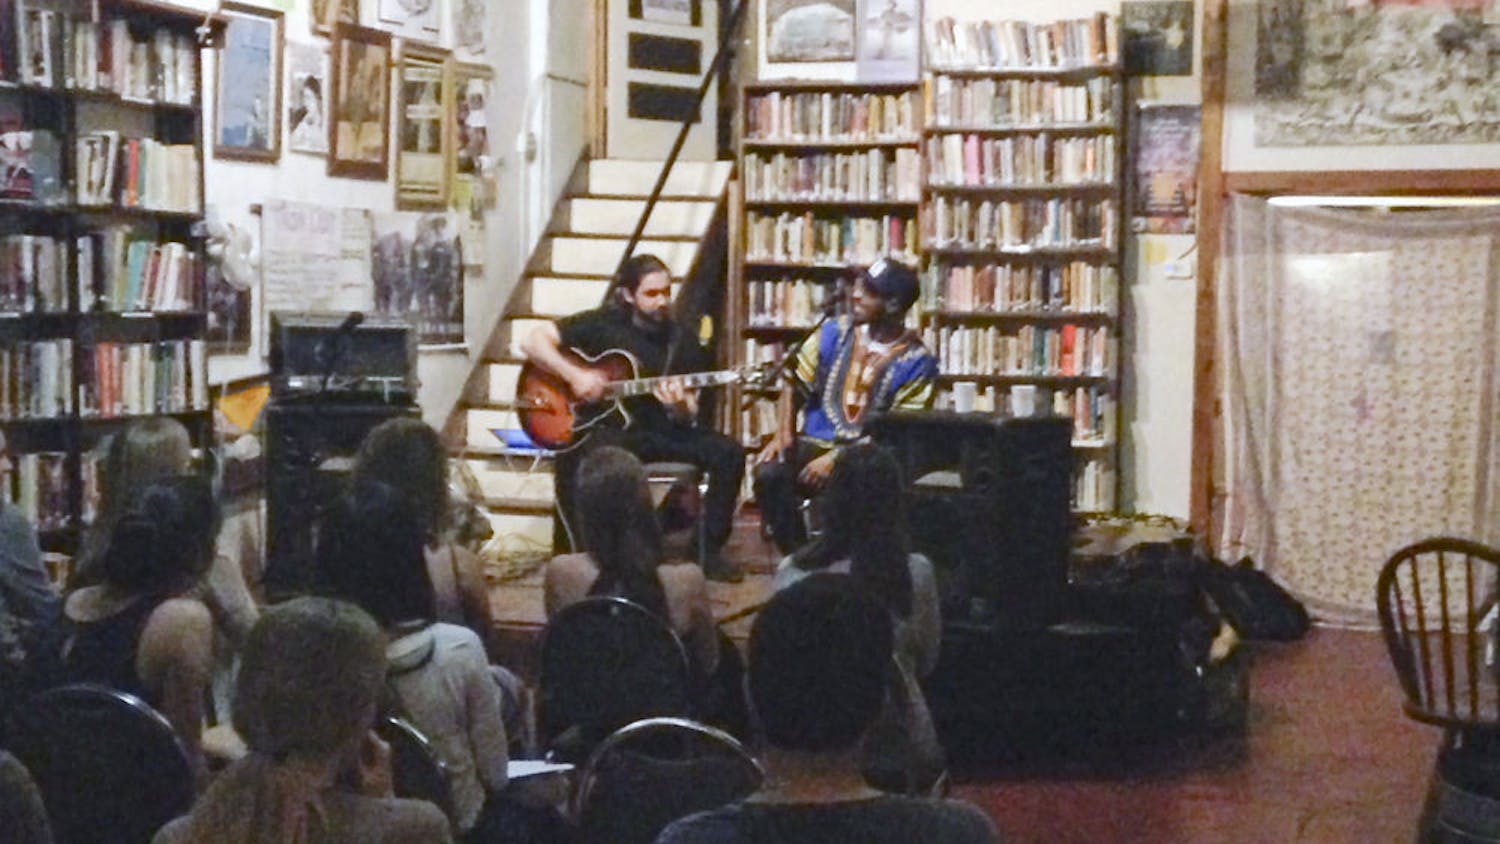 Terry Wissel (left), known by his stage name name T. Wissel, performs alongside California-based artist Courtney Linsey, known by his stage name SuNWhoa Love, in the Civic Media Center on Saturday night. The pair performed for To Write Love On Her Arms’ annual benefit “Living Stories,” concert.